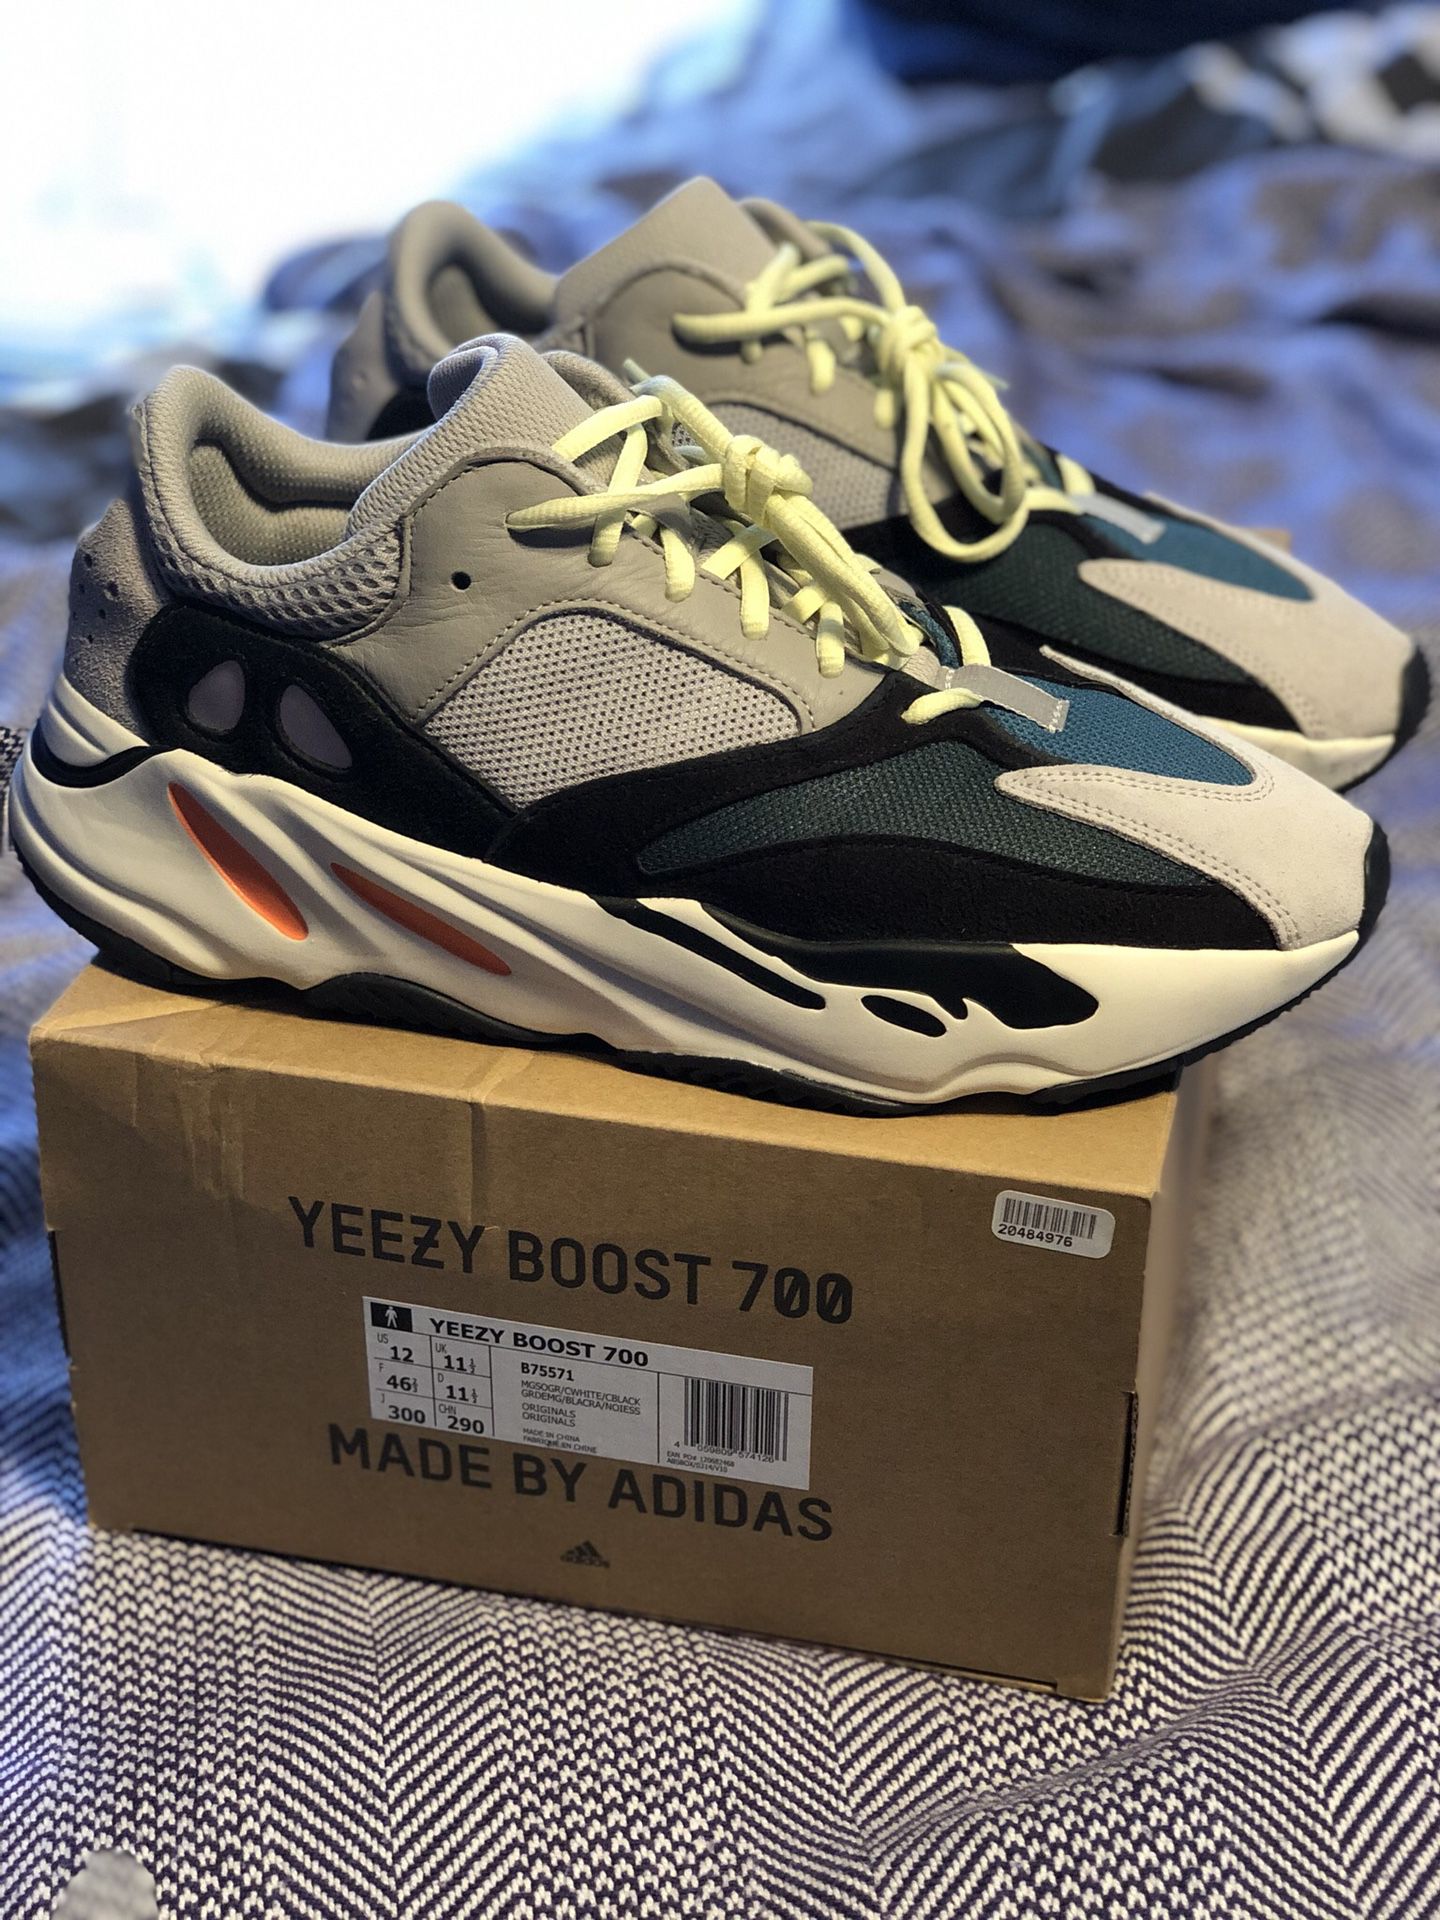 Yeezy 700 size 12 “Wave Runner” in great condition